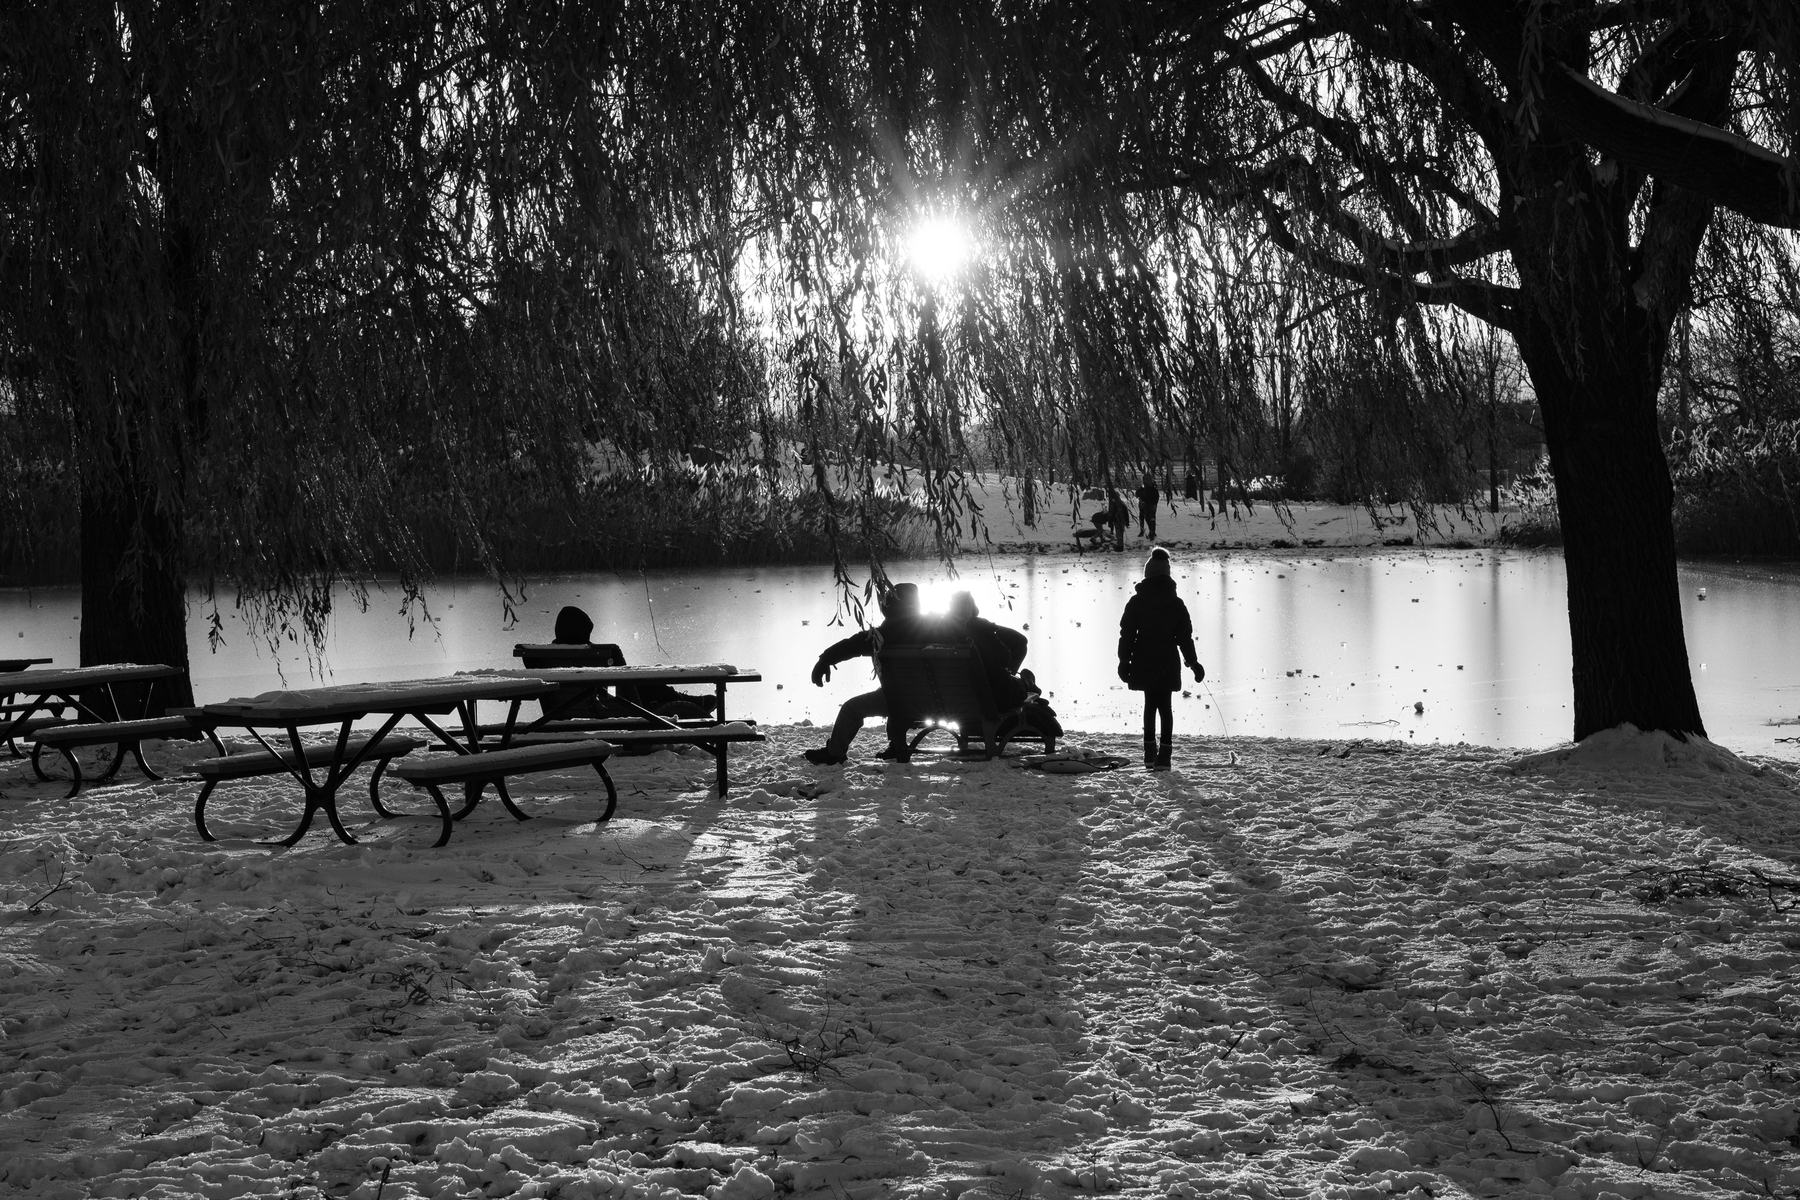 A family in silhouette looks out over the frozen pond in Parc Jarry.